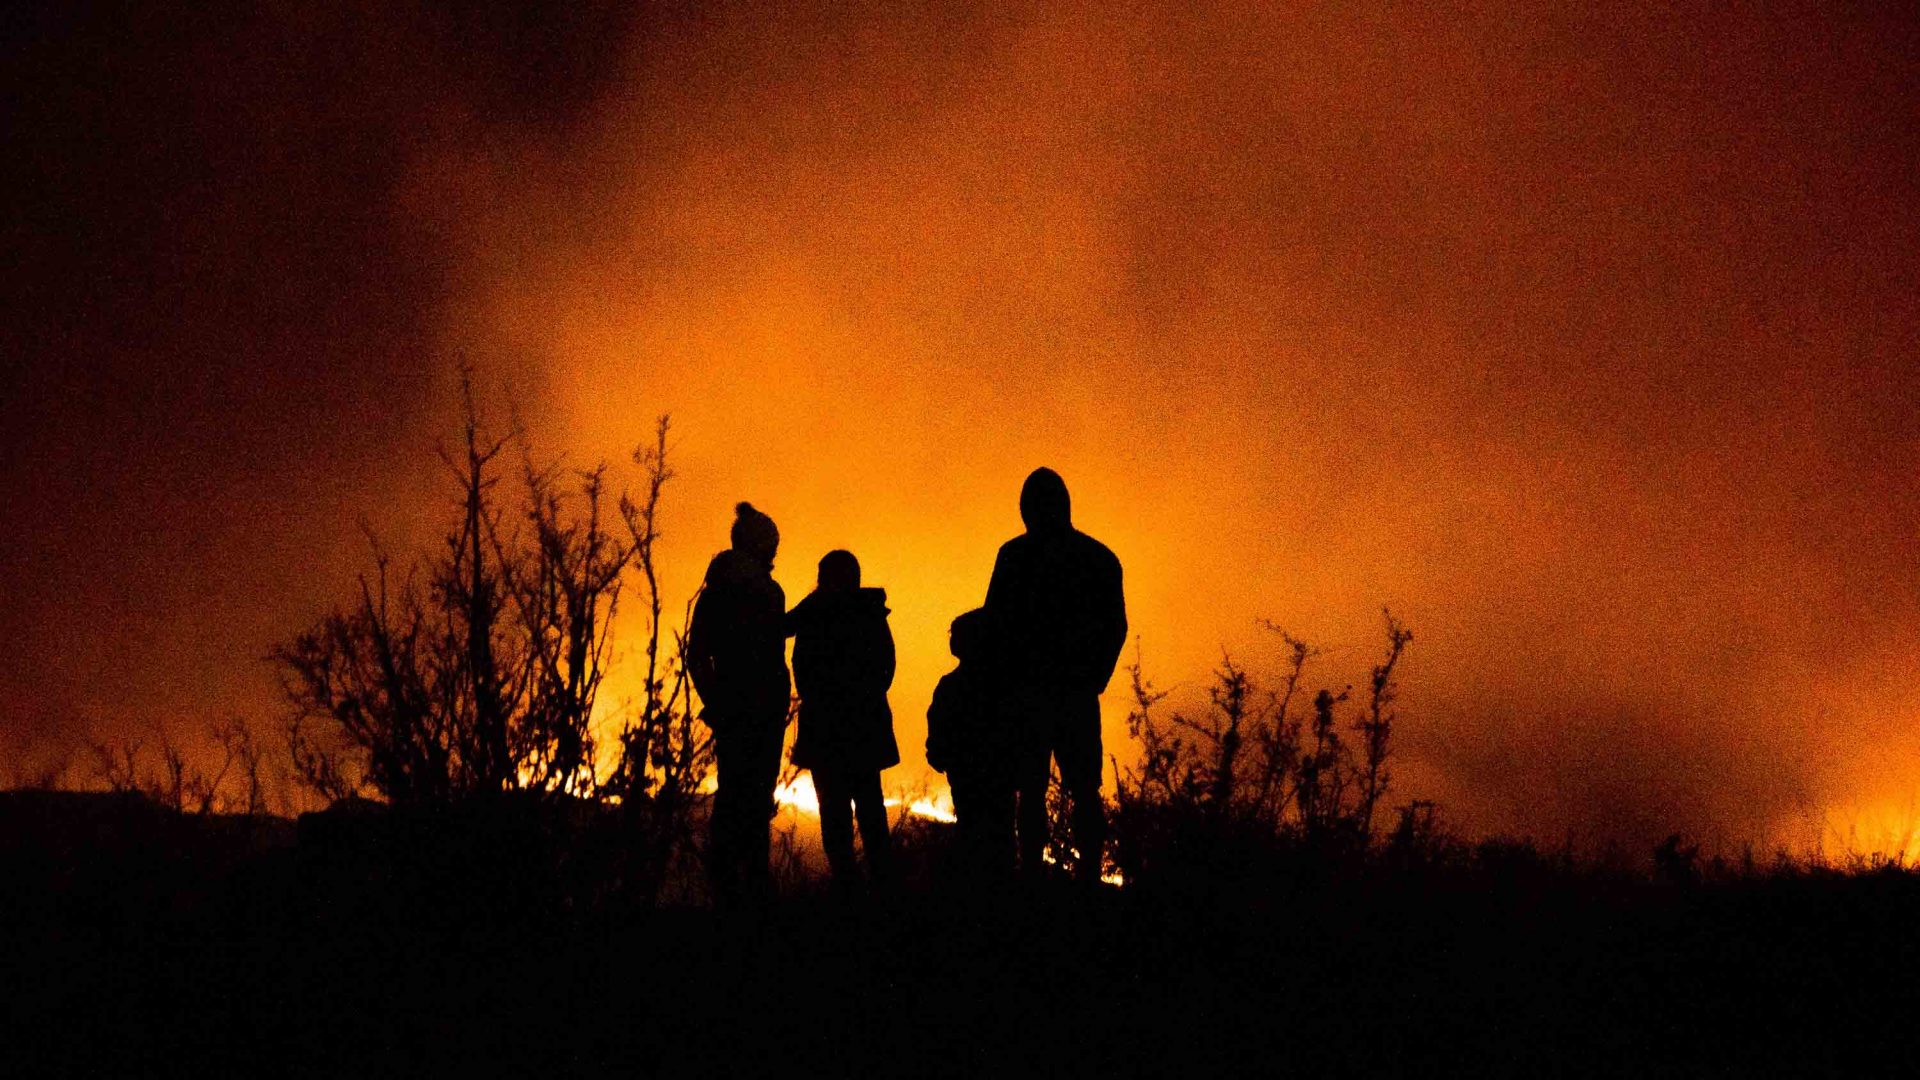 Wildfires aren’t going anywhere. So how can we learn to live with them?